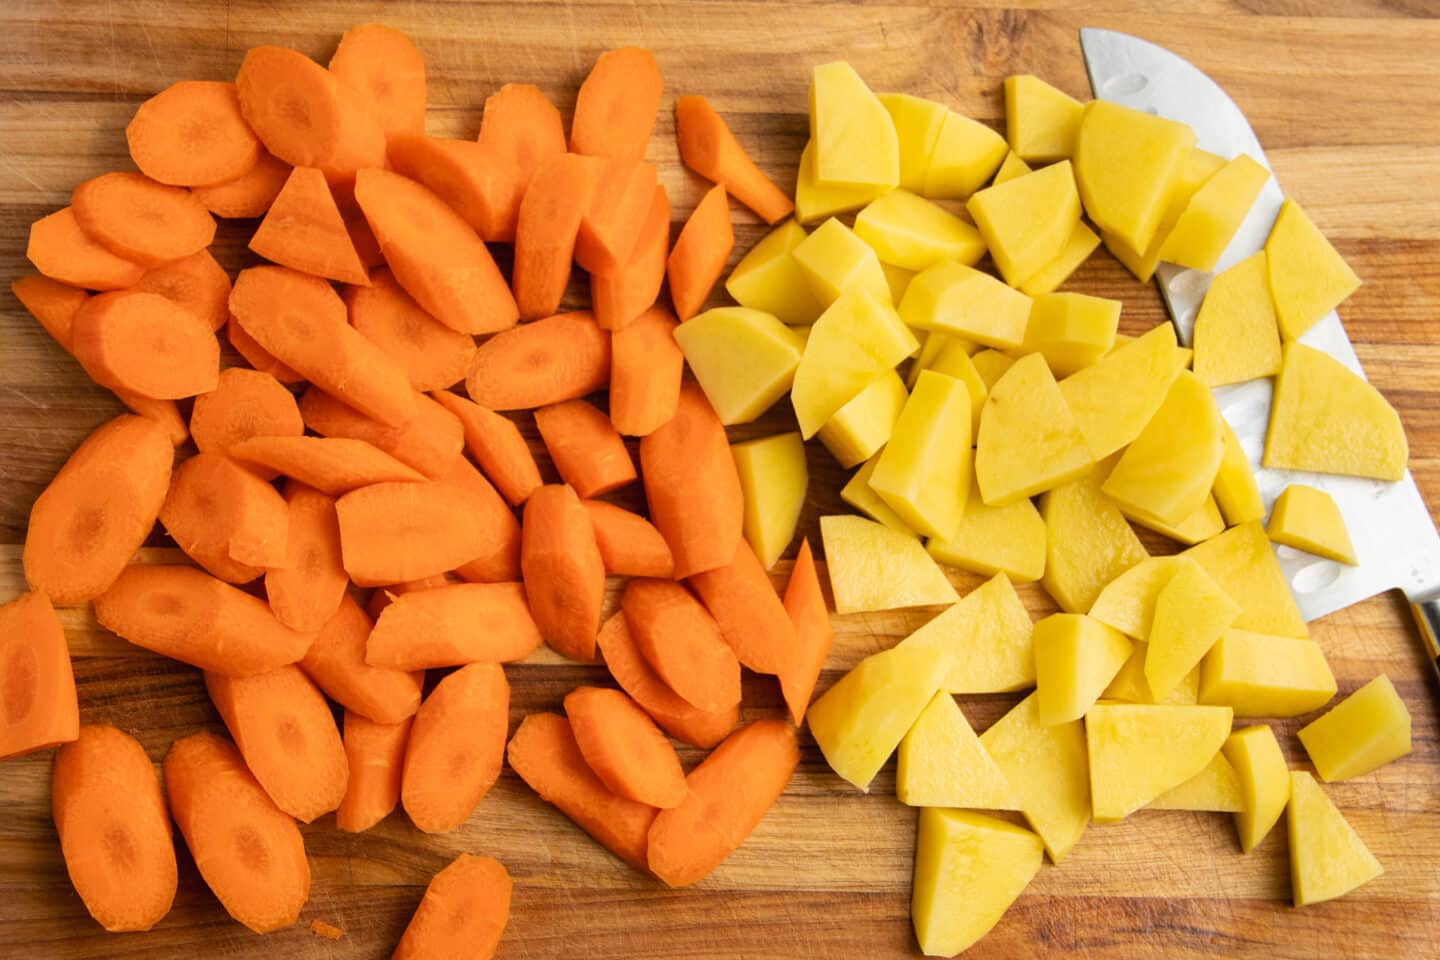 This is a picture of carrots and potatoes chopped on a cutting board.